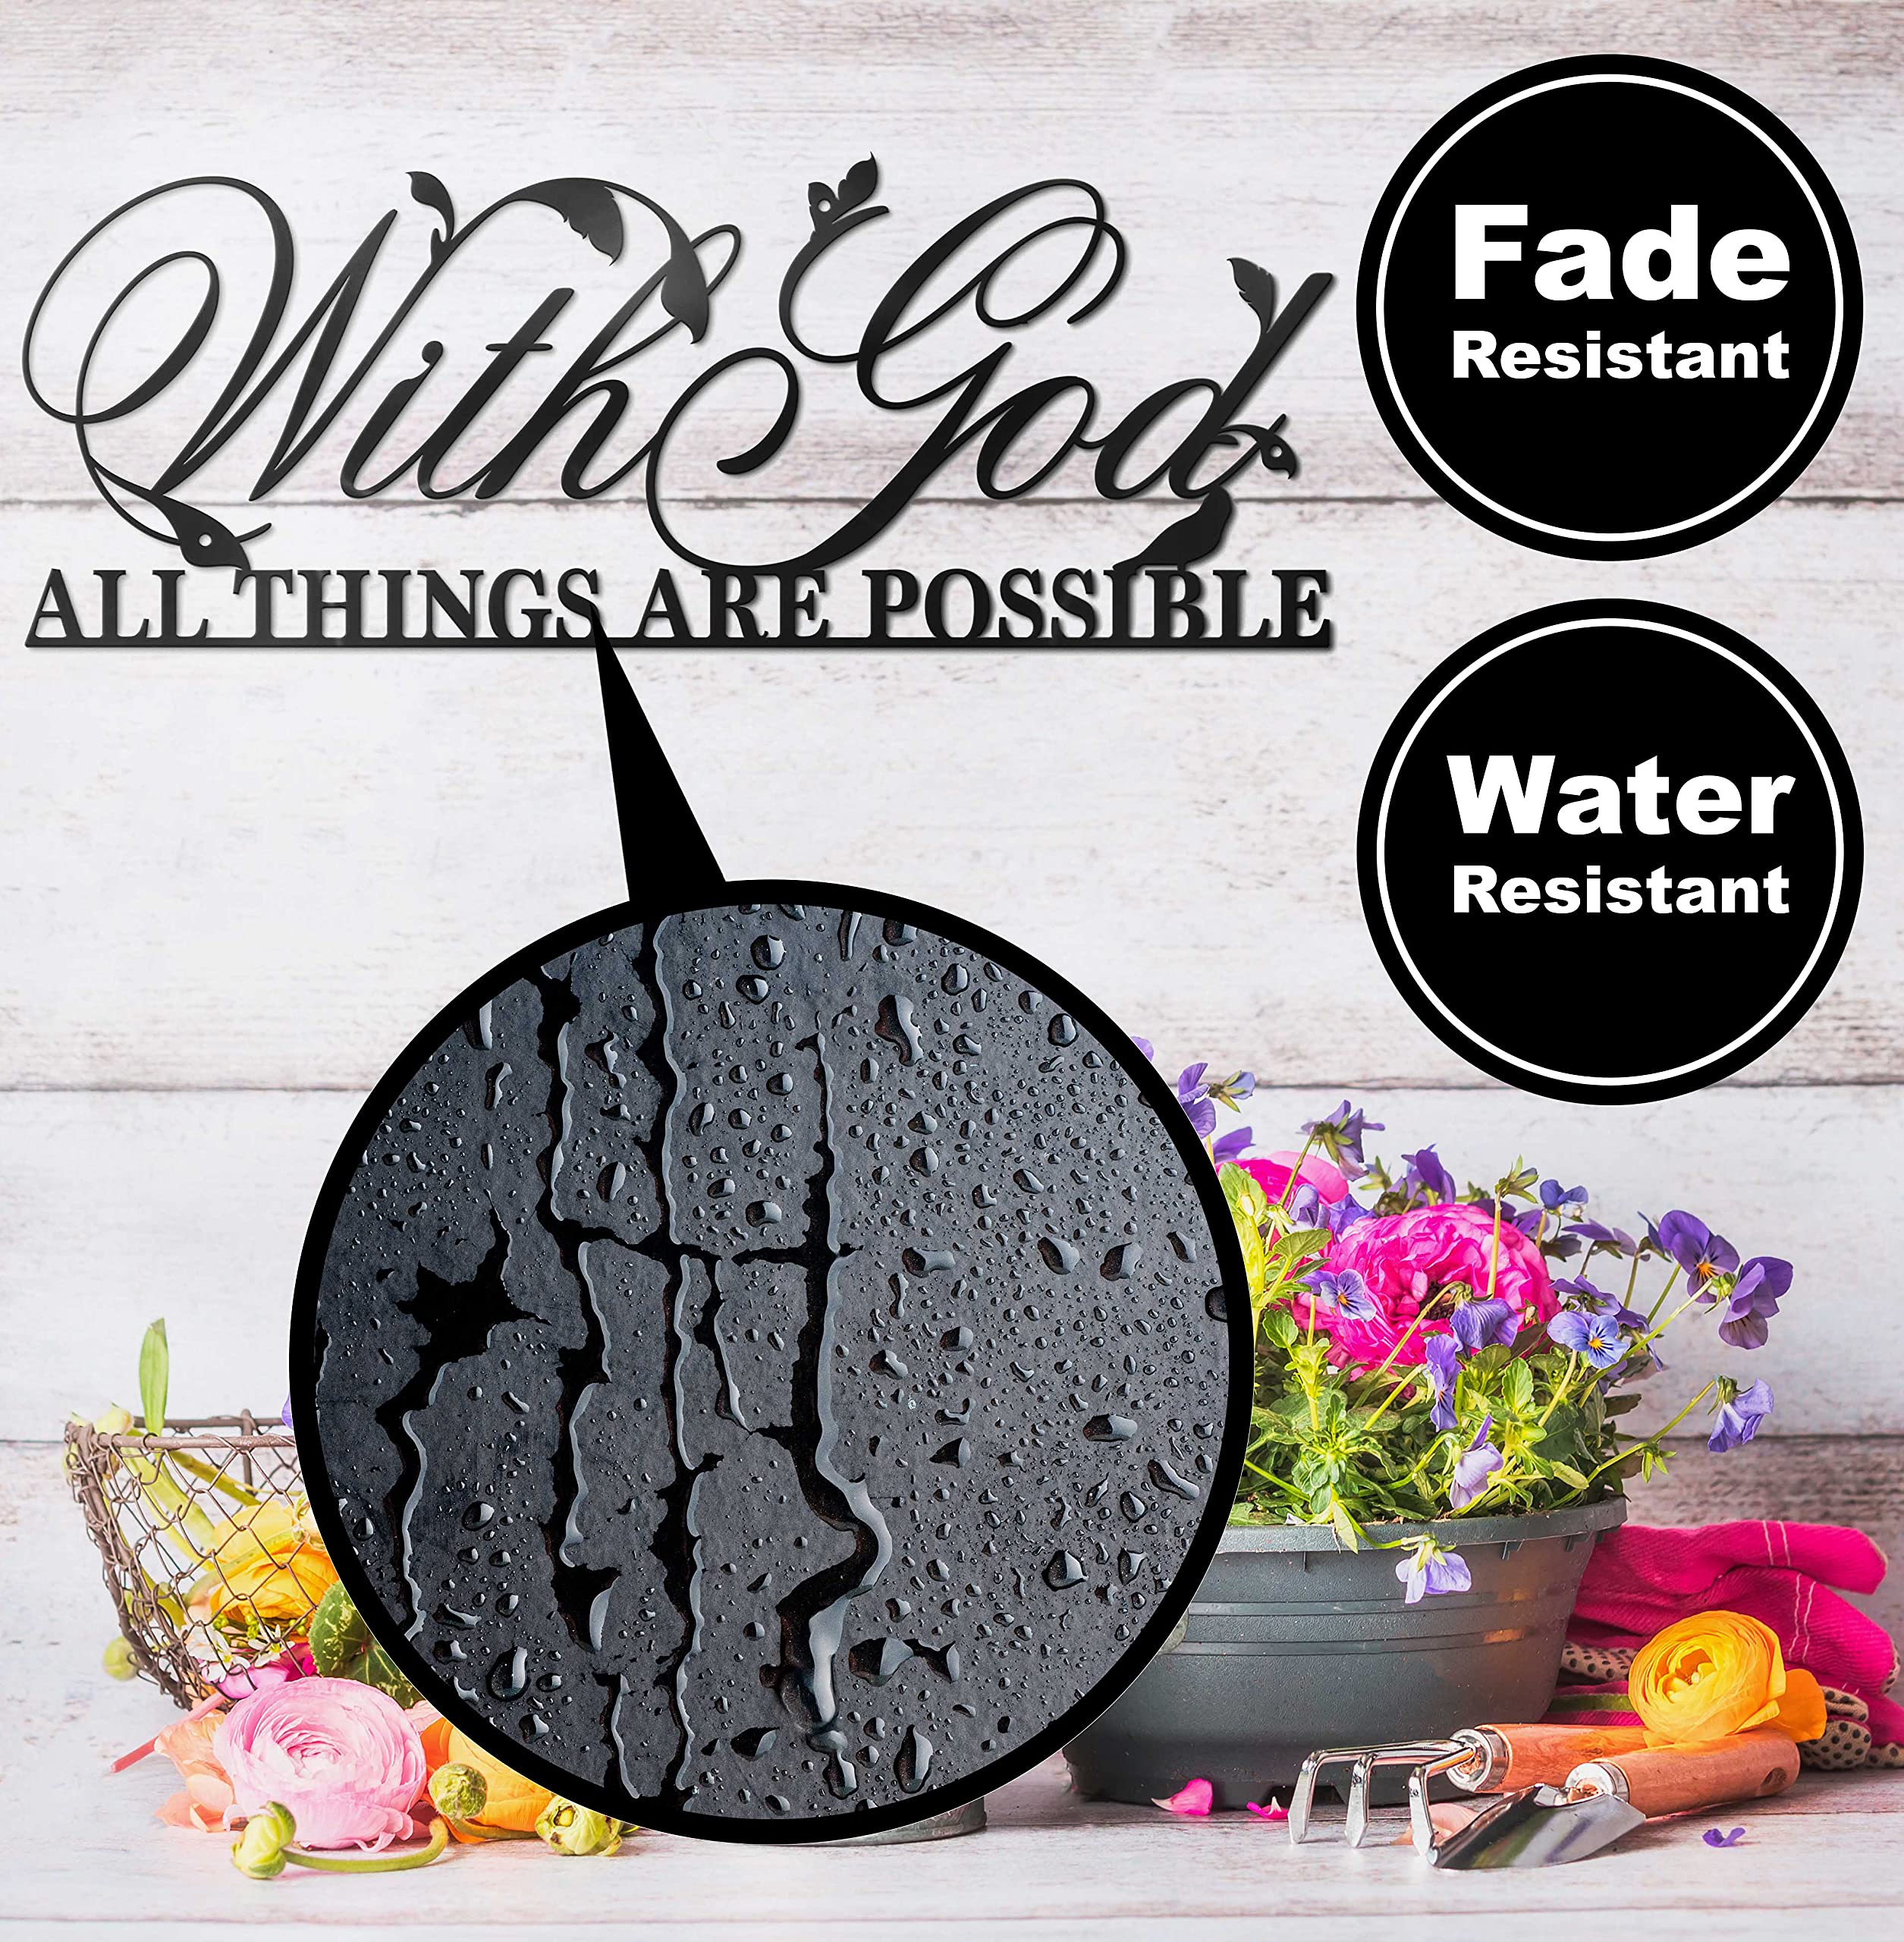 Gialer With God All Things Are Possible Sign Metal Wall Decor, 18"X12" Inch Religious Scripture Black Christian Bible Verses